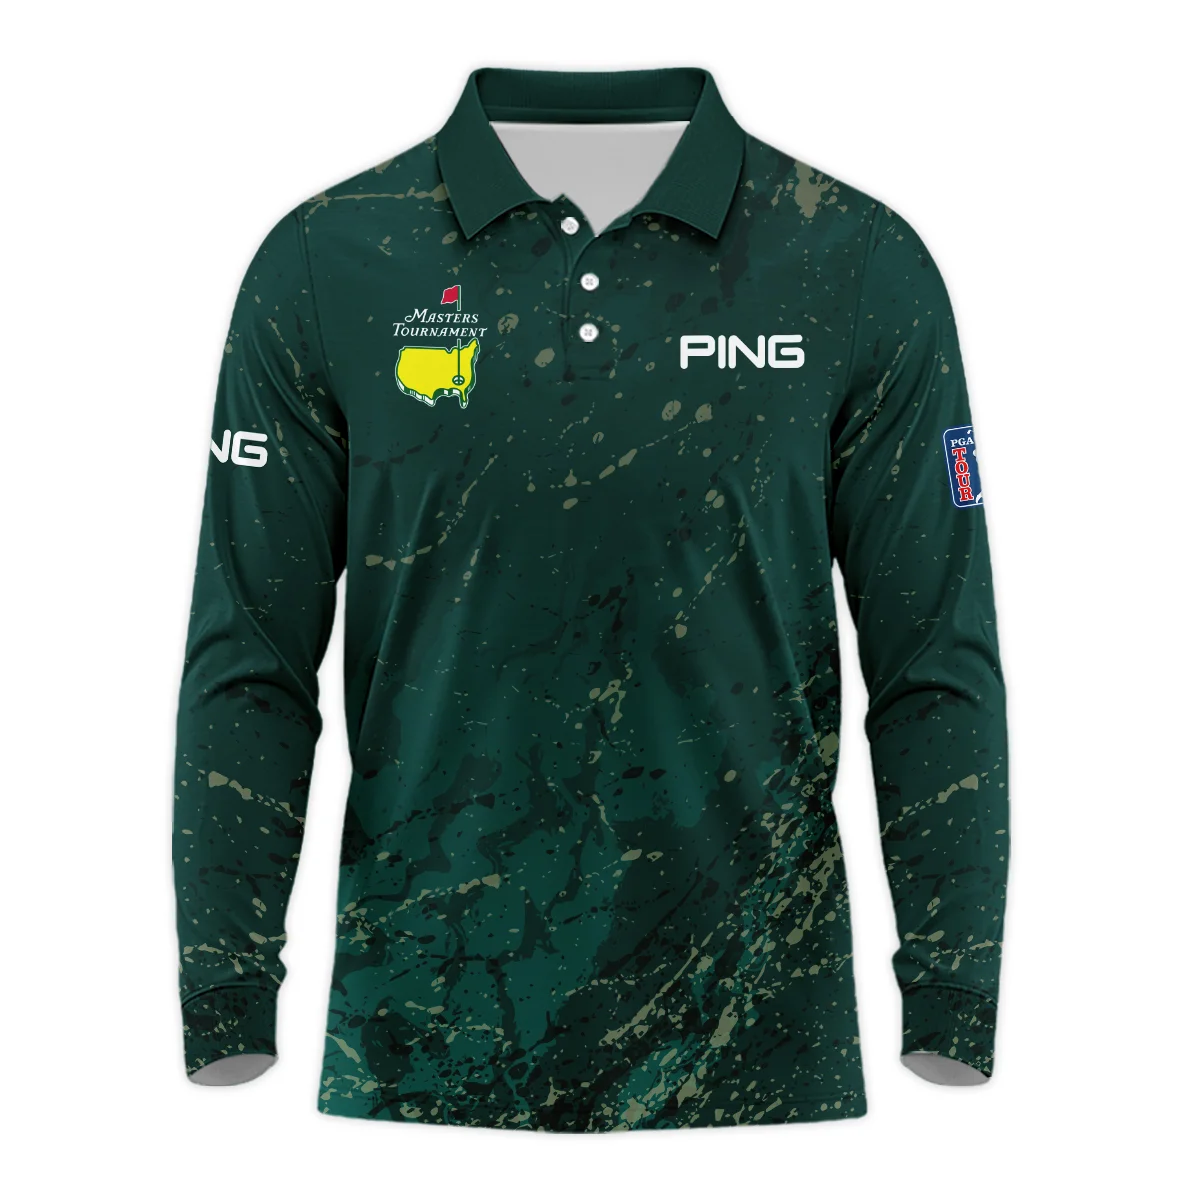 Old Cracked Texture With Gold Splash Paint Masters Tournament Ping Zipper Polo Shirt Style Classic Zipper Polo Shirt For Men